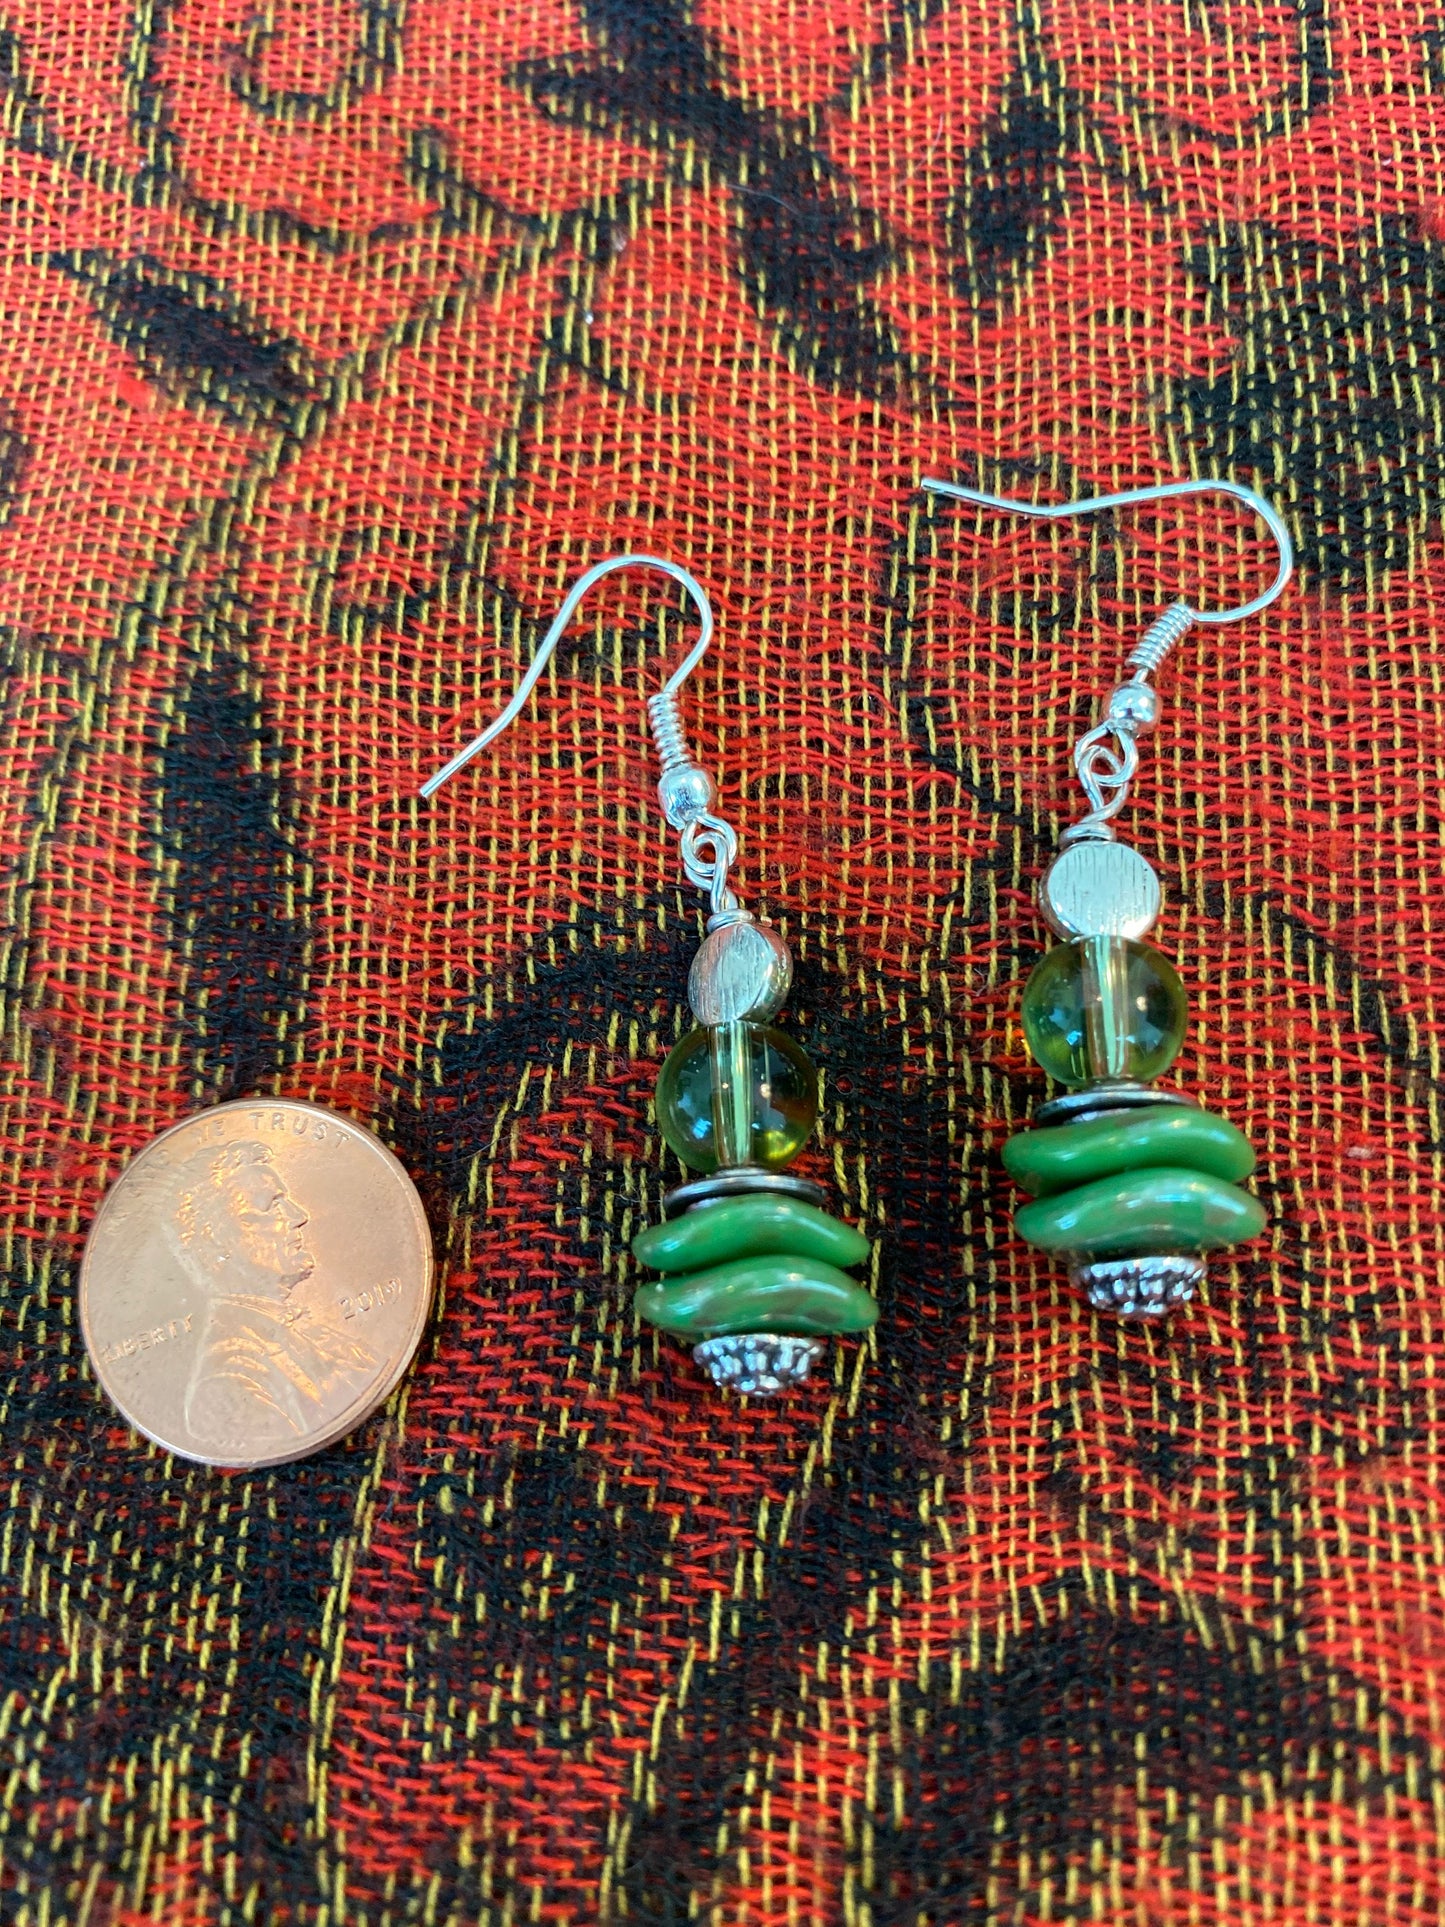 Lightweight and fun lime green dangle earrings with wavy discs